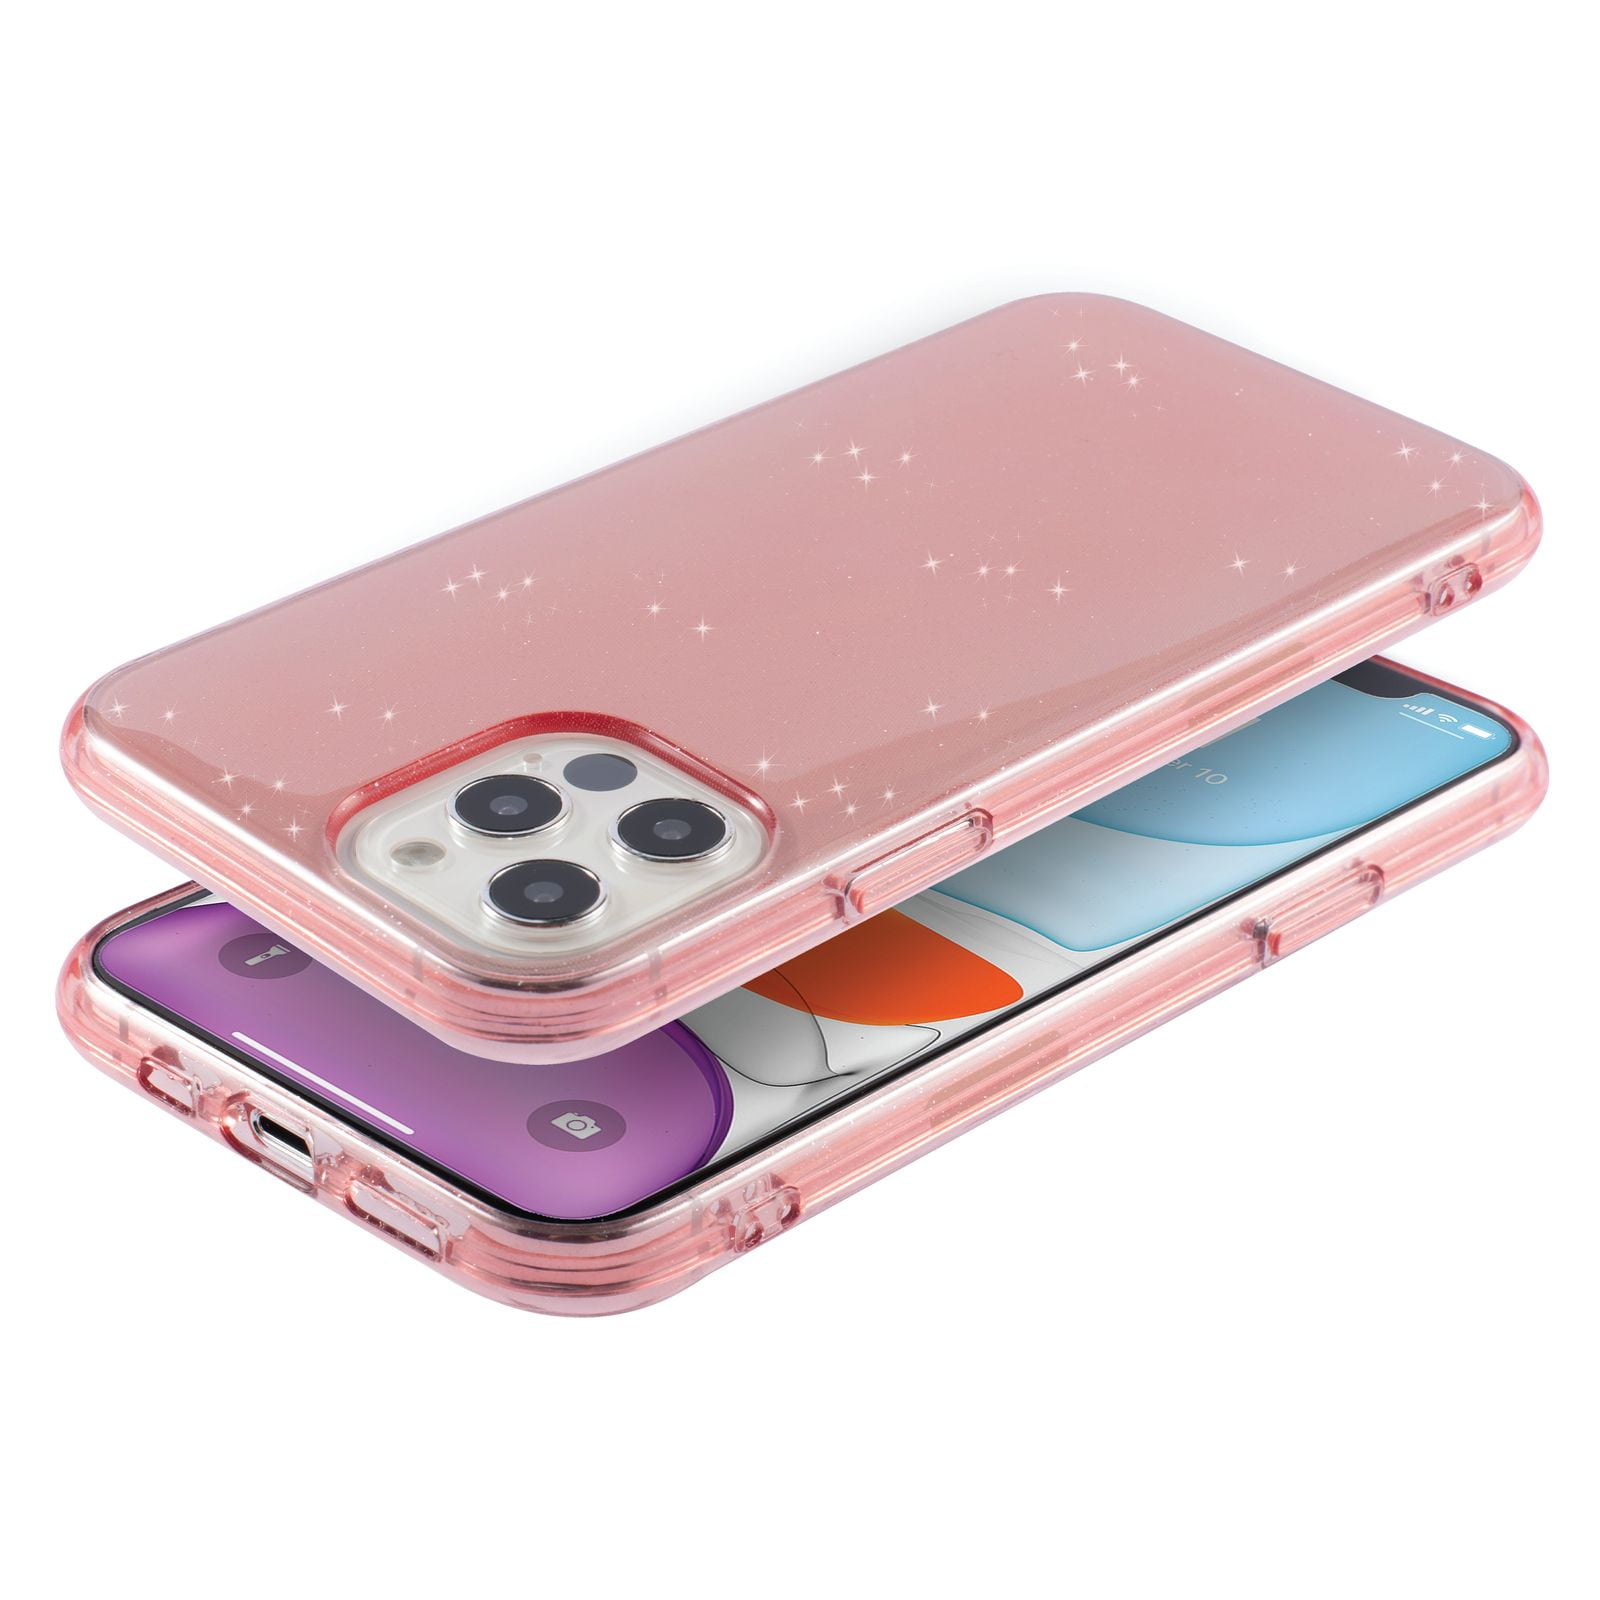 Insten Glitter Case For Iphone 12 Pro / Iphone 12 6.1, Soft Tpu Sparkle  Protective Cover, Crystal Clear Pink : Target